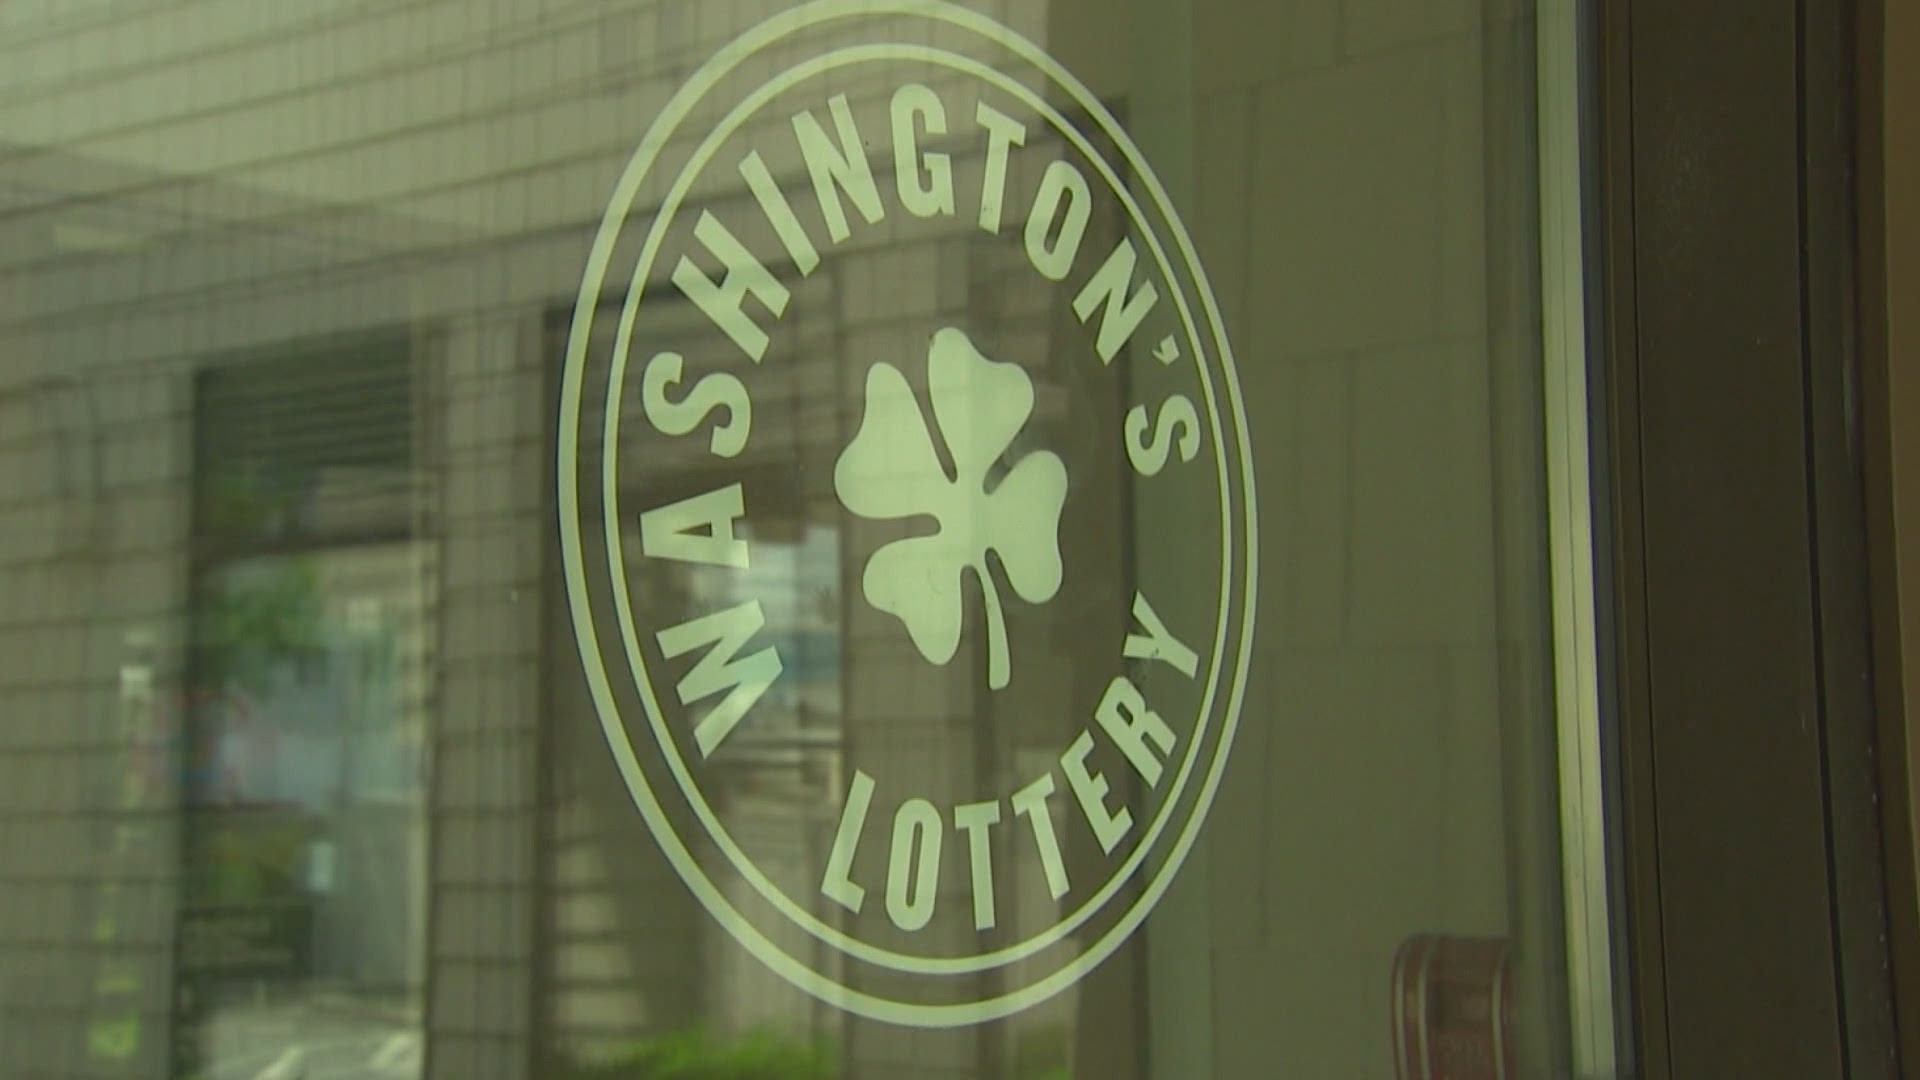 The grand prize winner for Washington's "Shot of a Lifetime" lottery will be contacted Wednesday.